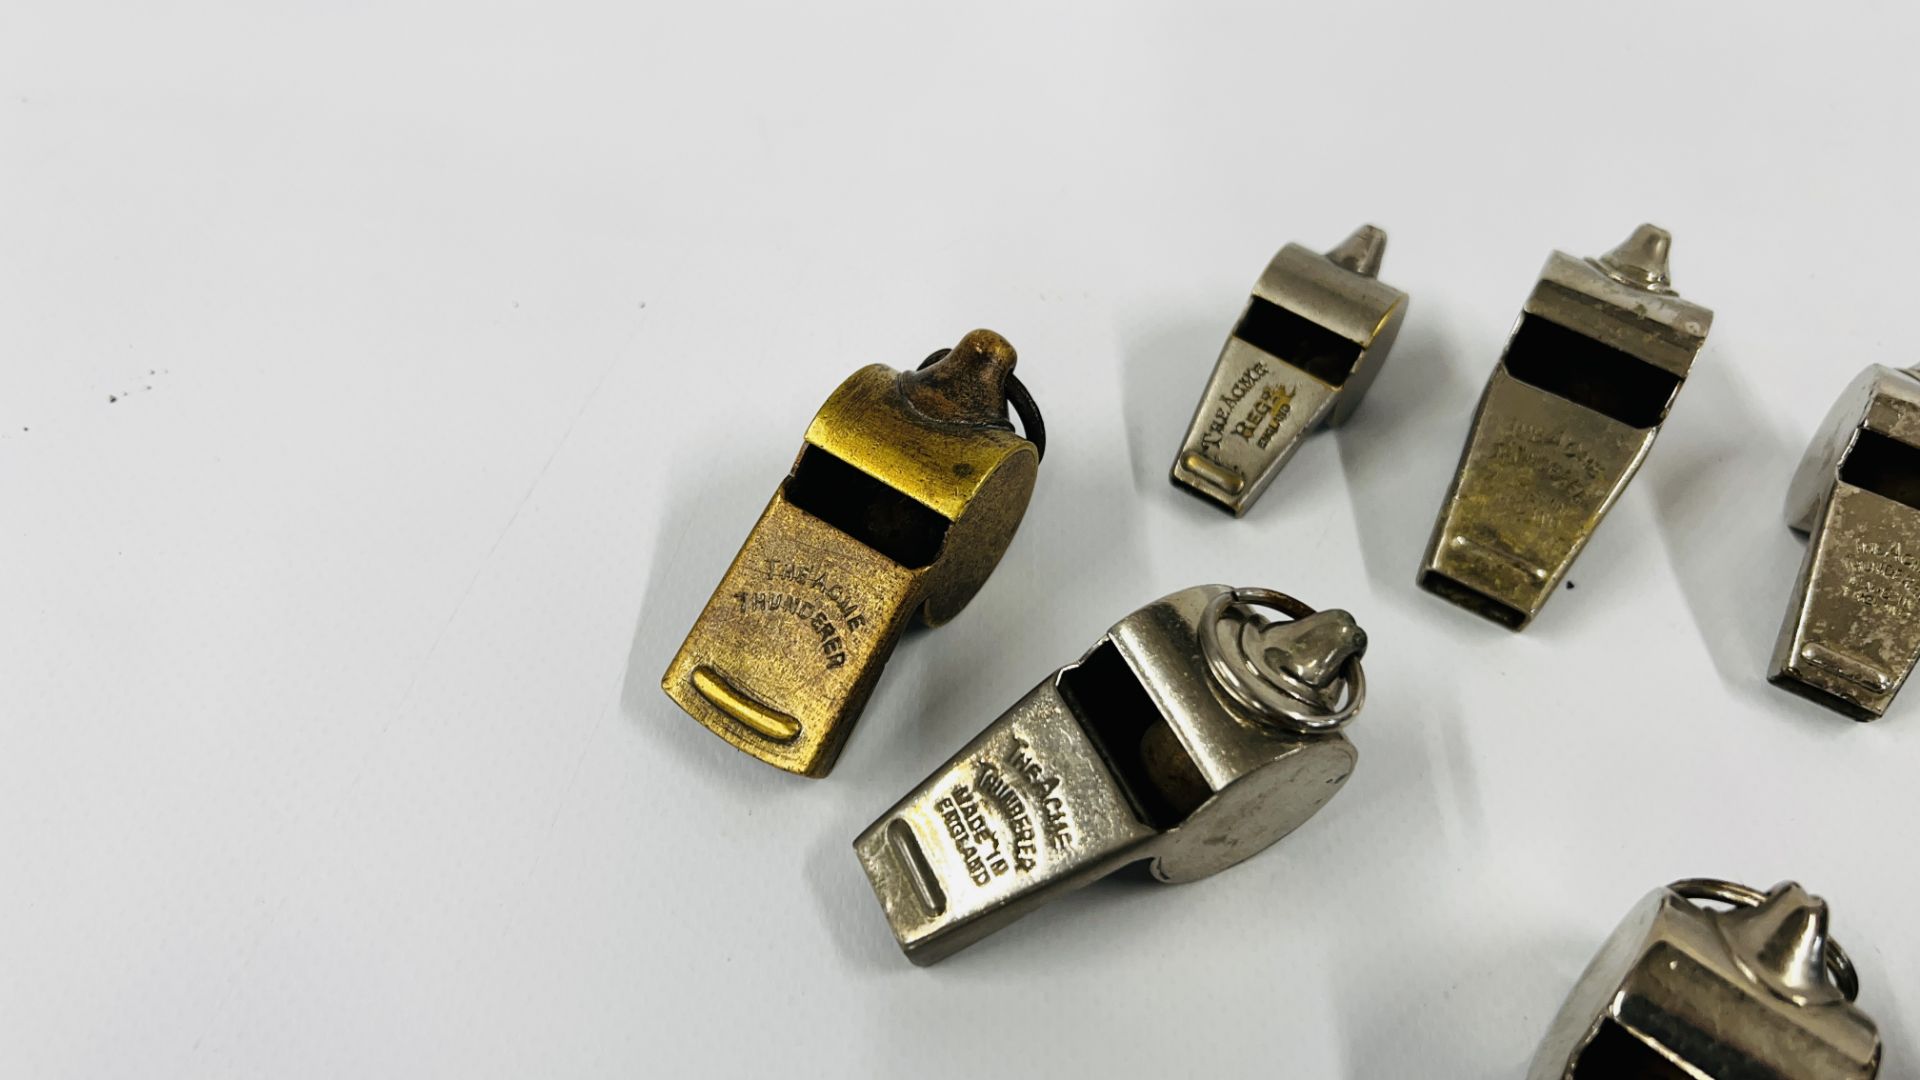 A COLLECTION OF 19 VINTAGE 1900'S - 70'S "ACME" THUNDERERS ESCARGOT WHISTLES. - Image 6 of 7